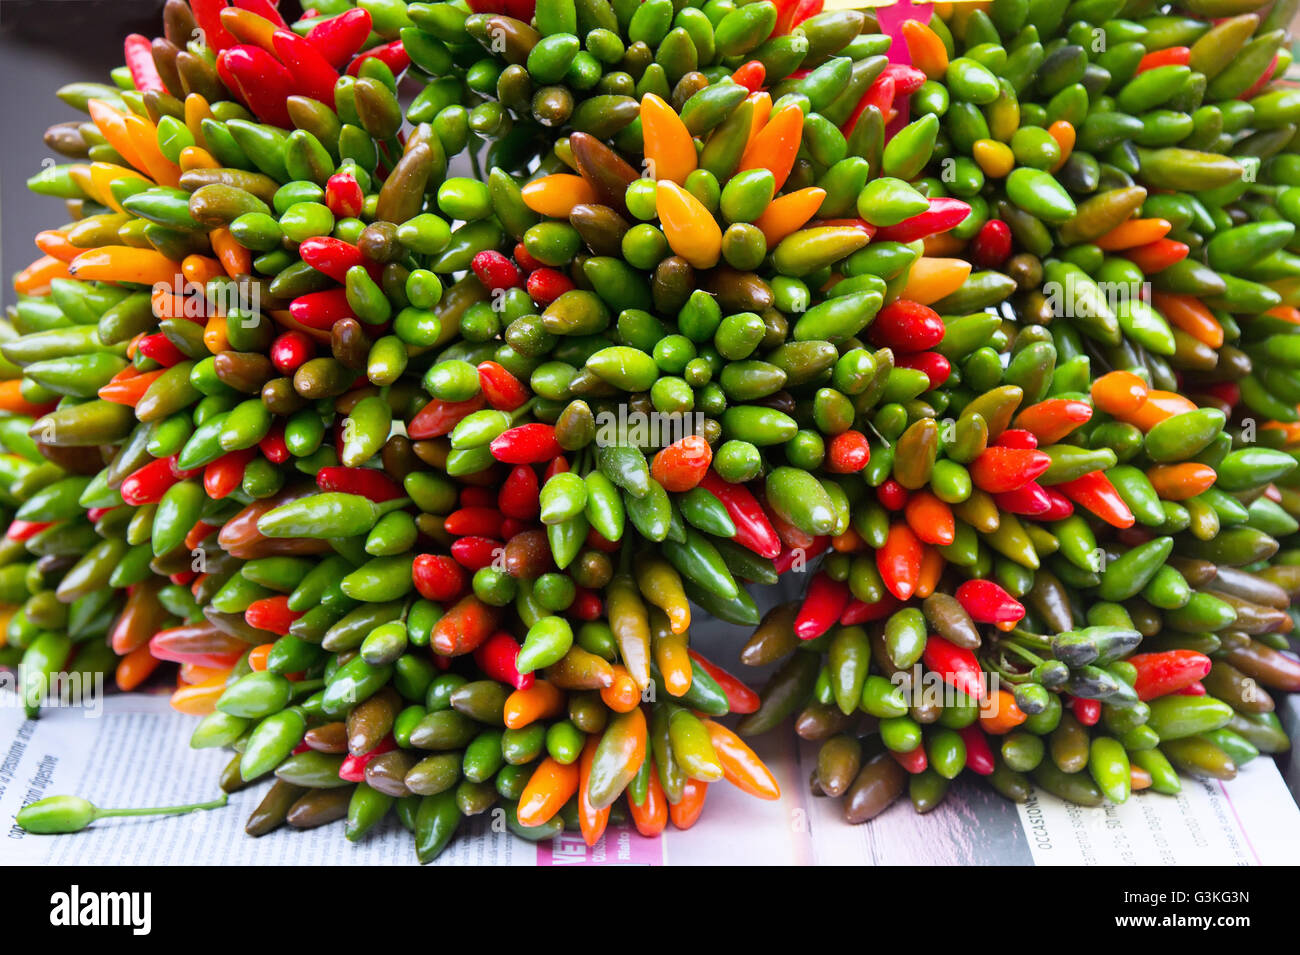 Bunch of green and red peppers chili at market Stock Photo